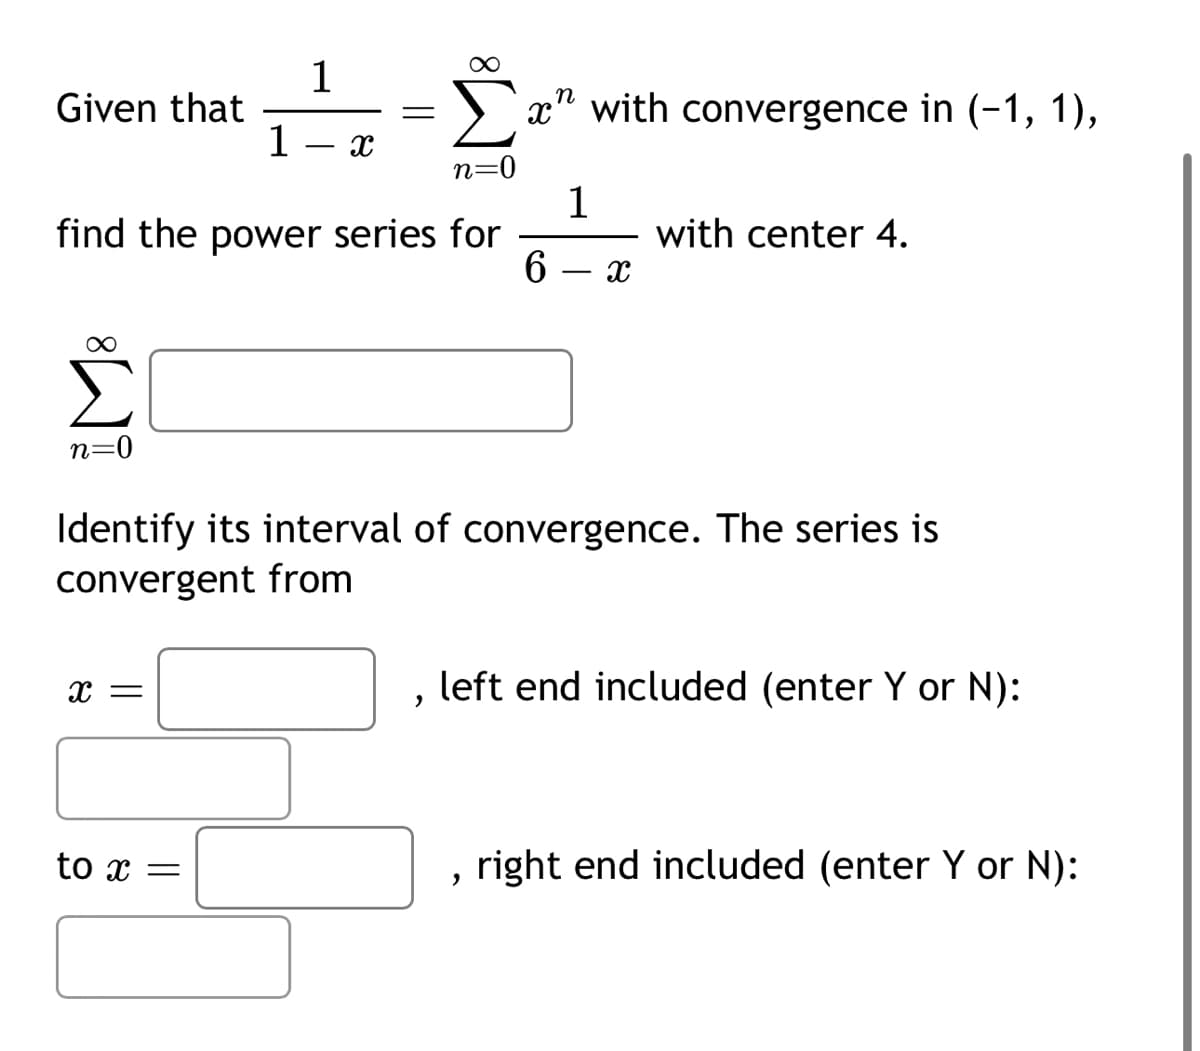 1
Given that
1
―
X
=
n=
find the power series for
n
x" with convergence in (-1, 1),
1
6
-
X
with center 4.
n=0
Identify its interval of convergence. The series is
convergent from
x =
,
left end included (enter Y or N):
to x =
,
right end included (enter Y or N):